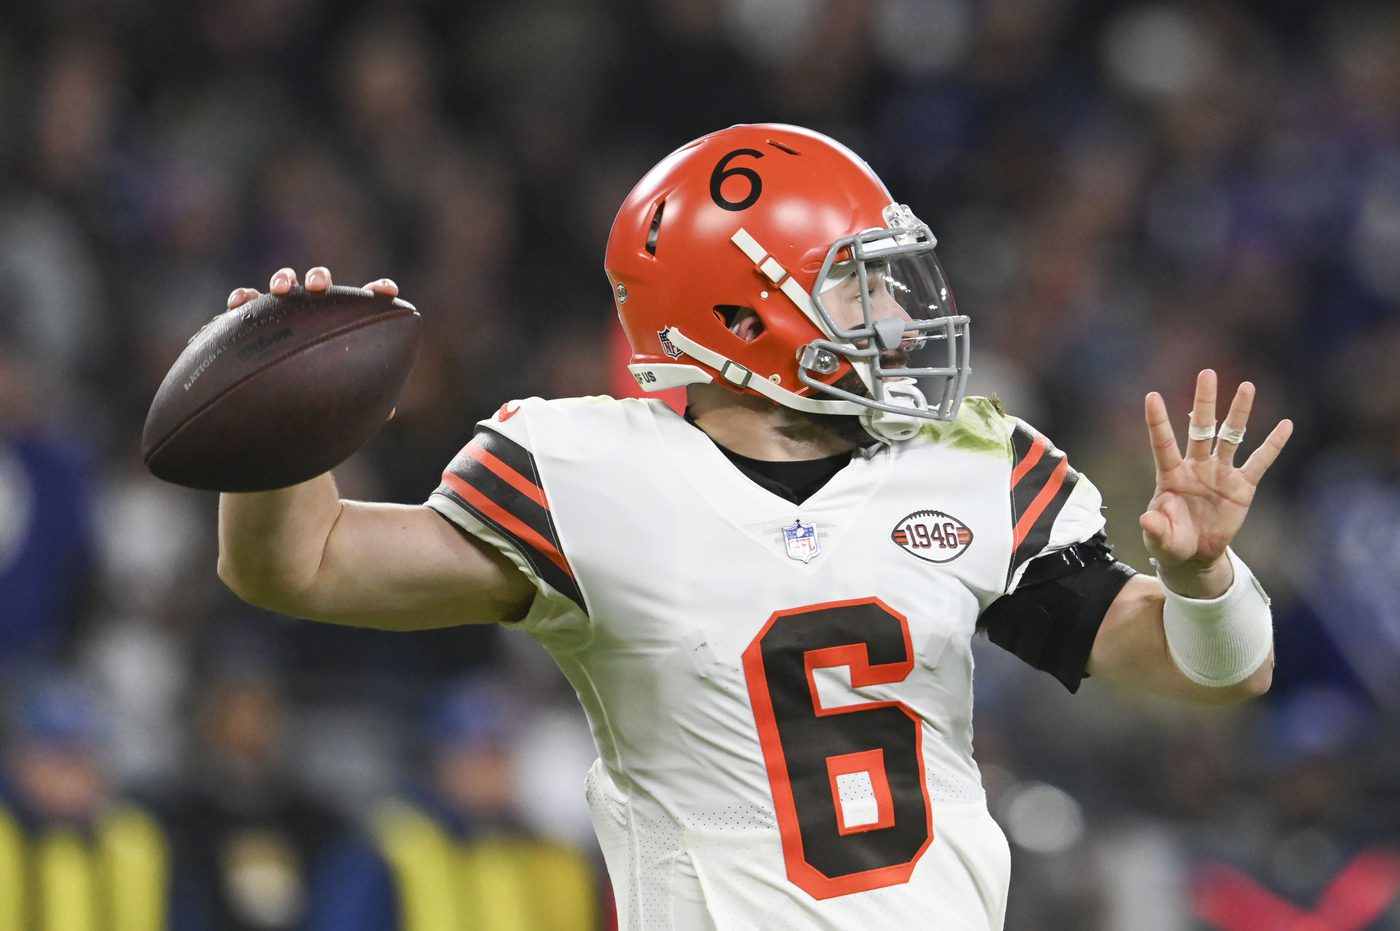 Nov 28, 2021; Baltimore, Maryland, USA; Cleveland Browns quarterback Baker Mayfield (6) looks to throw during the third quarter against the Baltimore Ravens at M&T Bank Stadium. Mandatory Credit: Tommy Gilligan-USA TODAY Sports